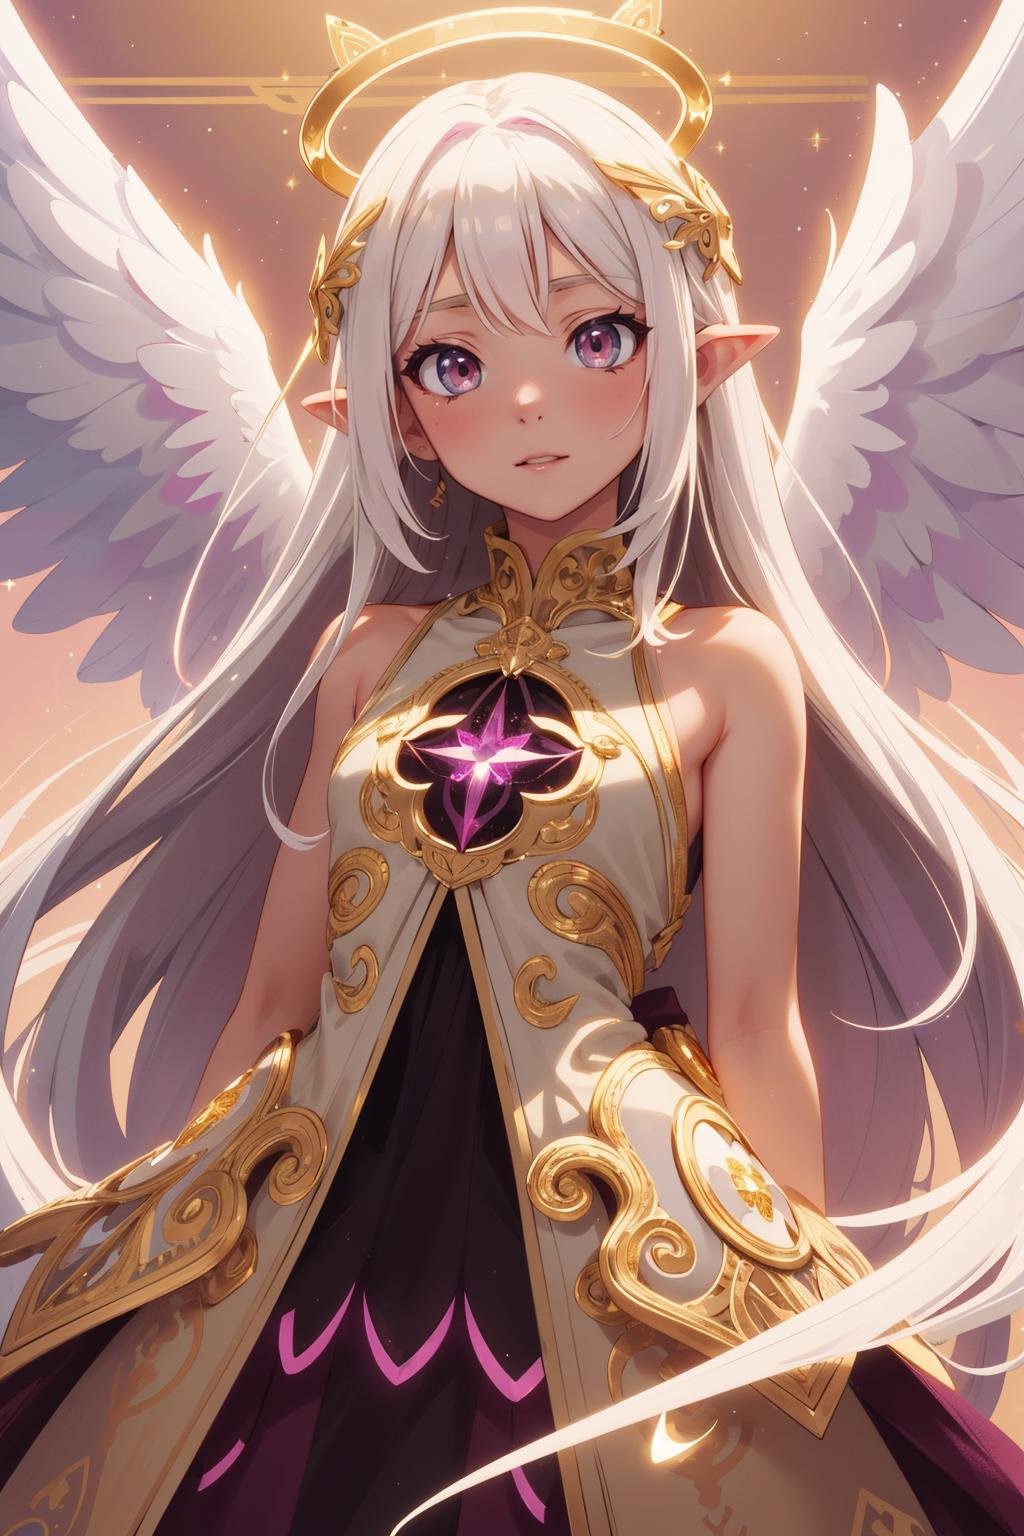 (intricate details), (****), eldritch, (dream), illustration, heaven background, 1girl, white hair, golden eyes, long hair, halo, angel wings, serene, looking at viewer, black, (magenta:1.2), (white:0.8), immaculate, heroic \(theme\), glow, glowing eyes, (sparkly:0.9 gold), (arms at sides:1.3)